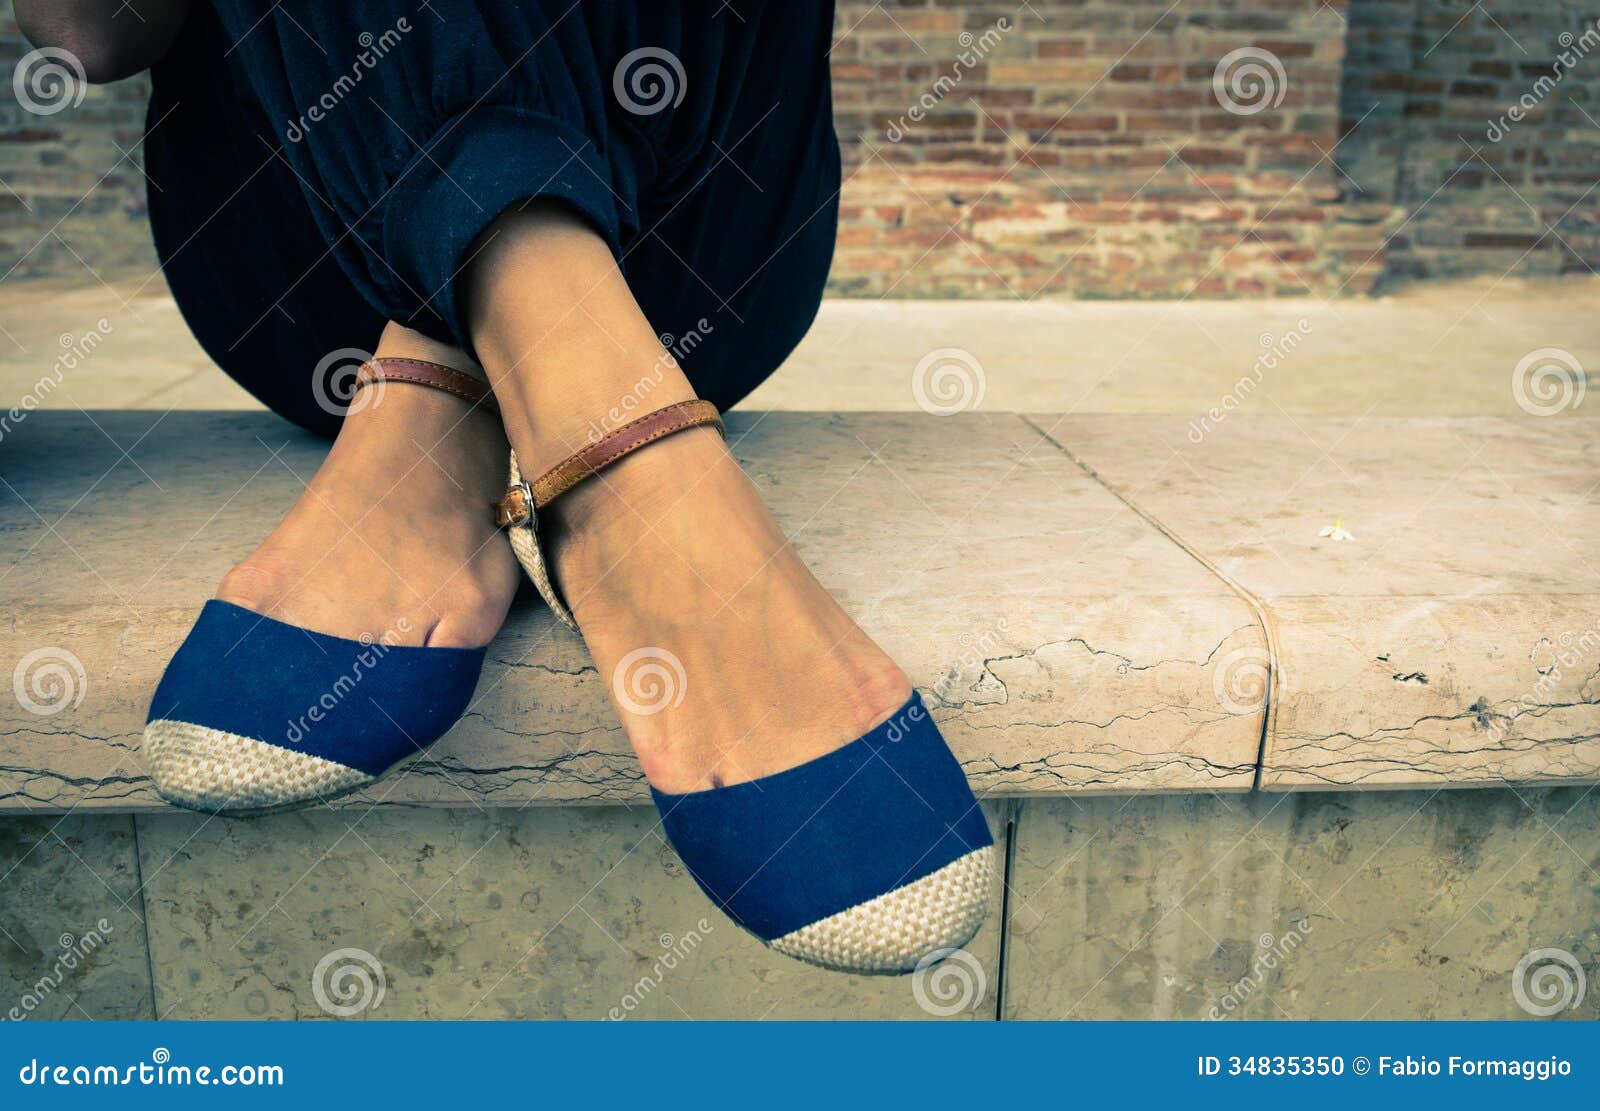 Girls feet stock photo. Image of human, concept, alone - 34835350